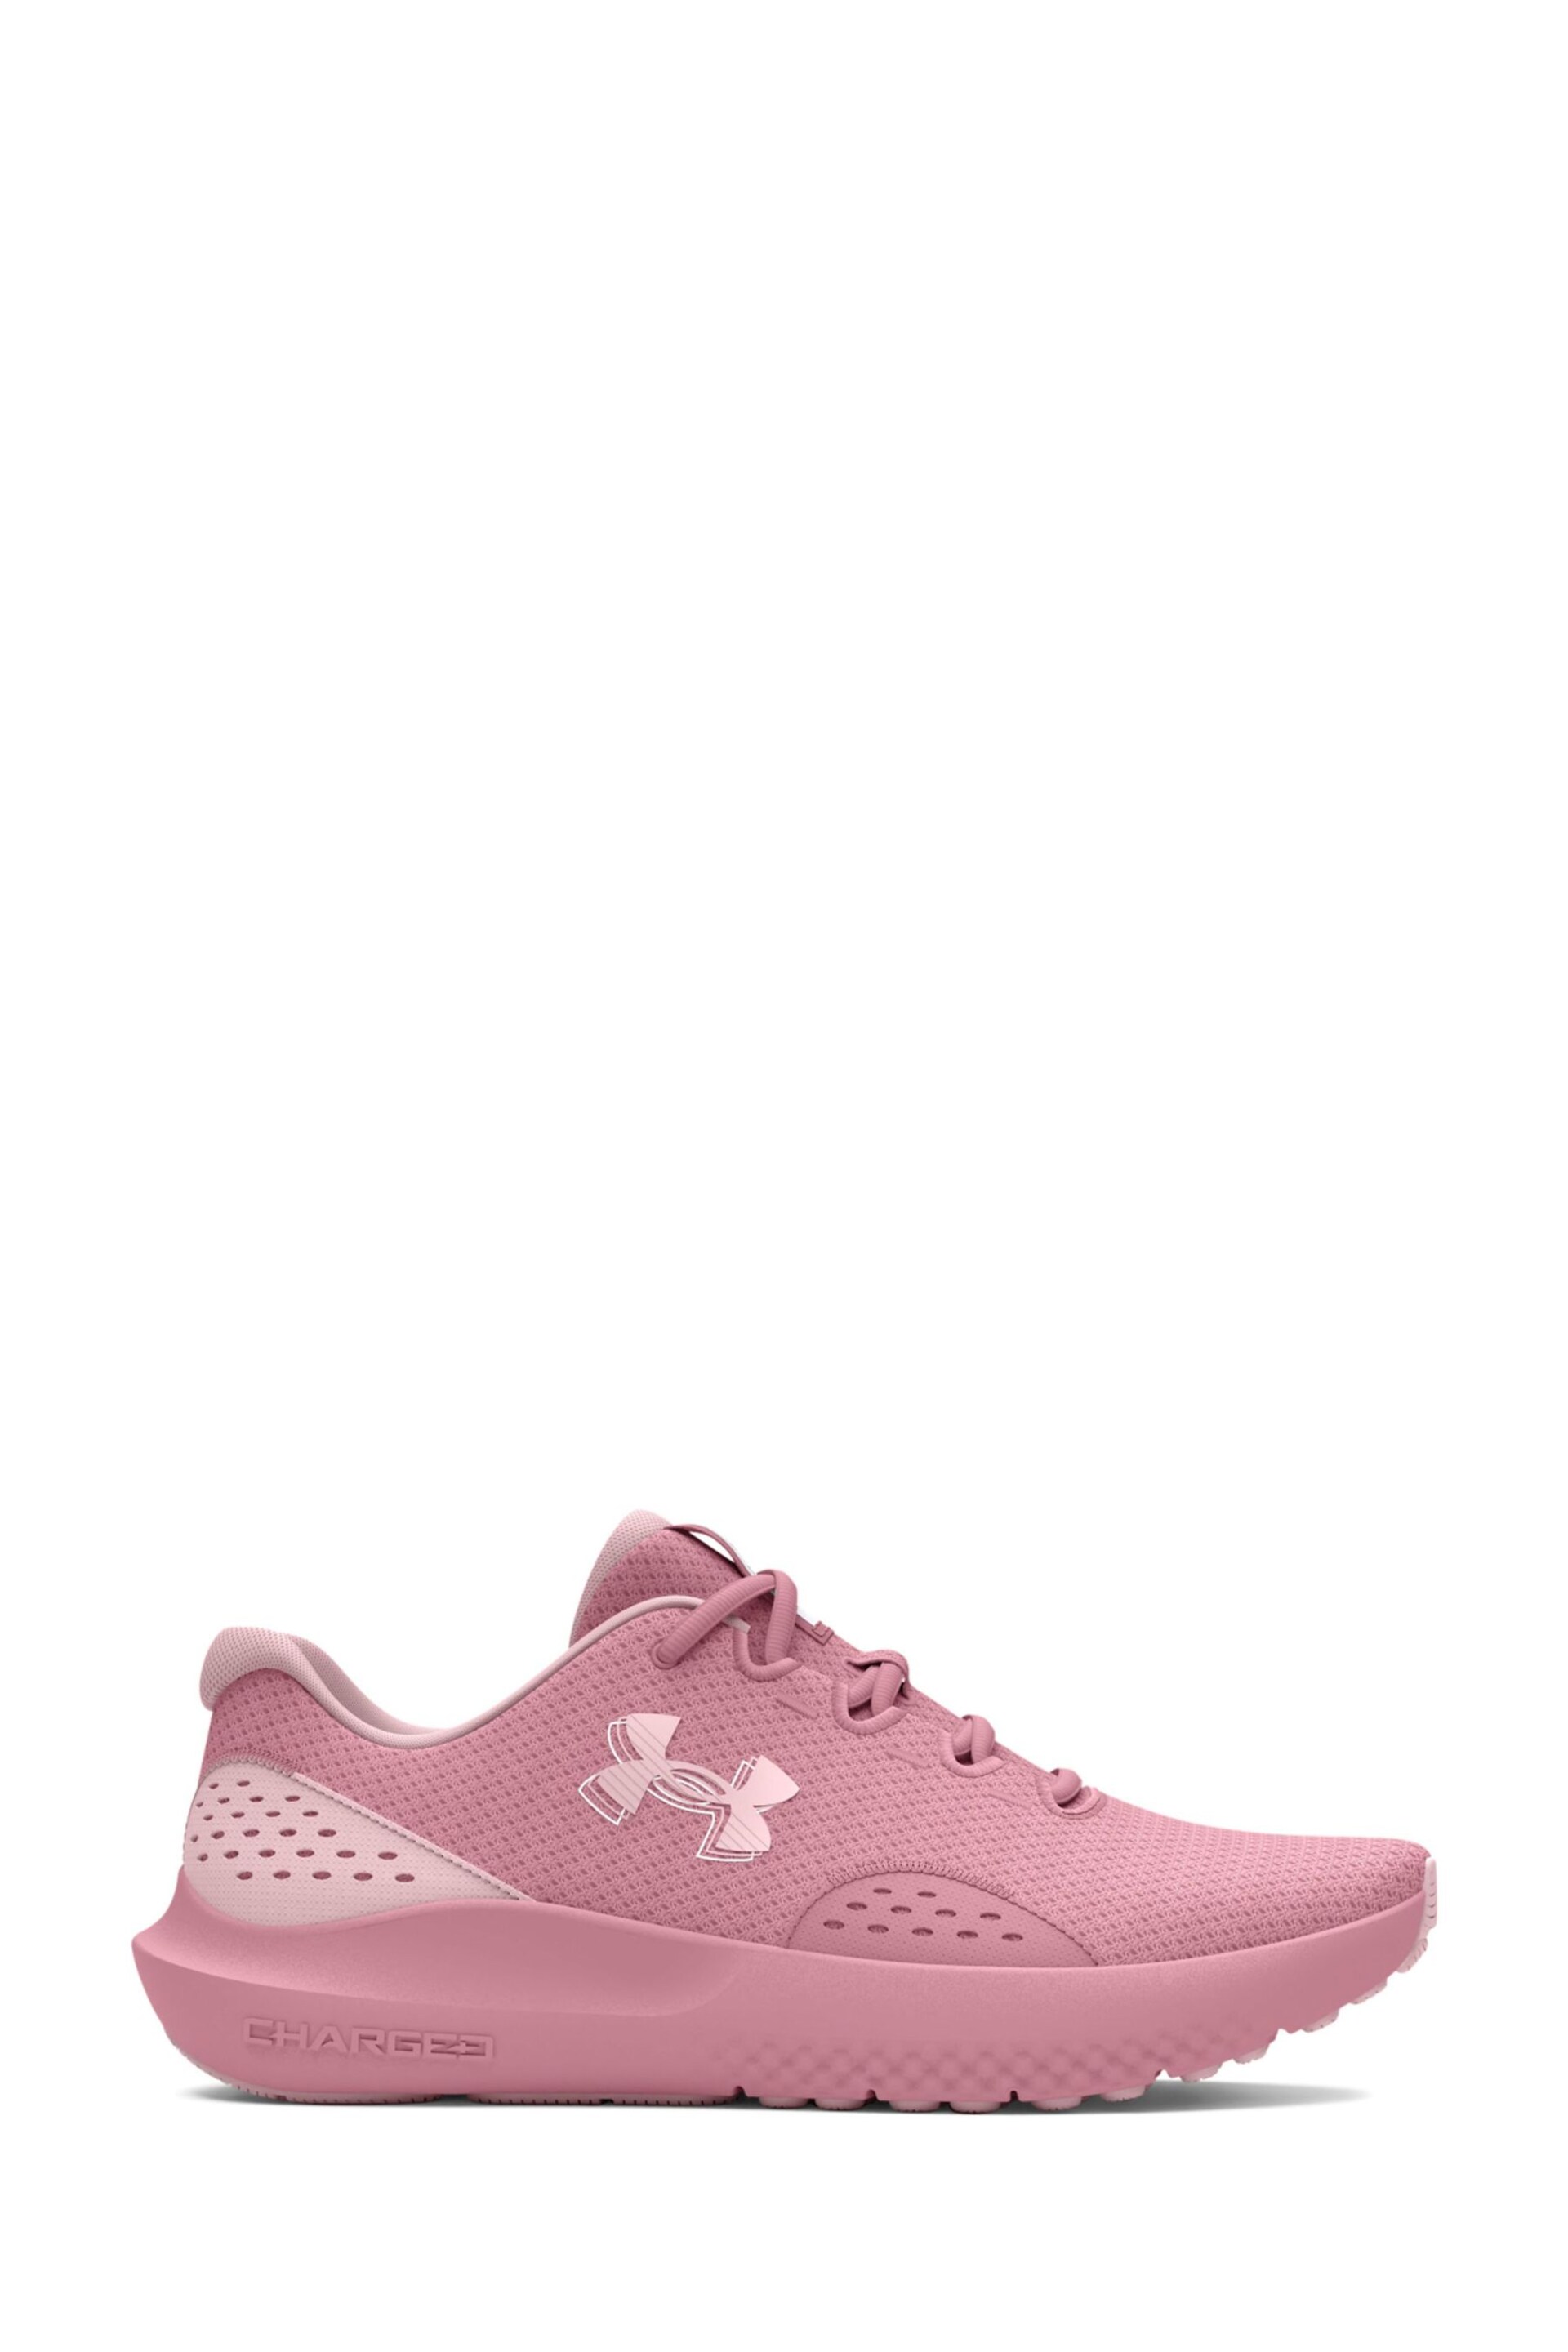 Under Armour Pink Charged Surge Trainers - Image 1 of 6